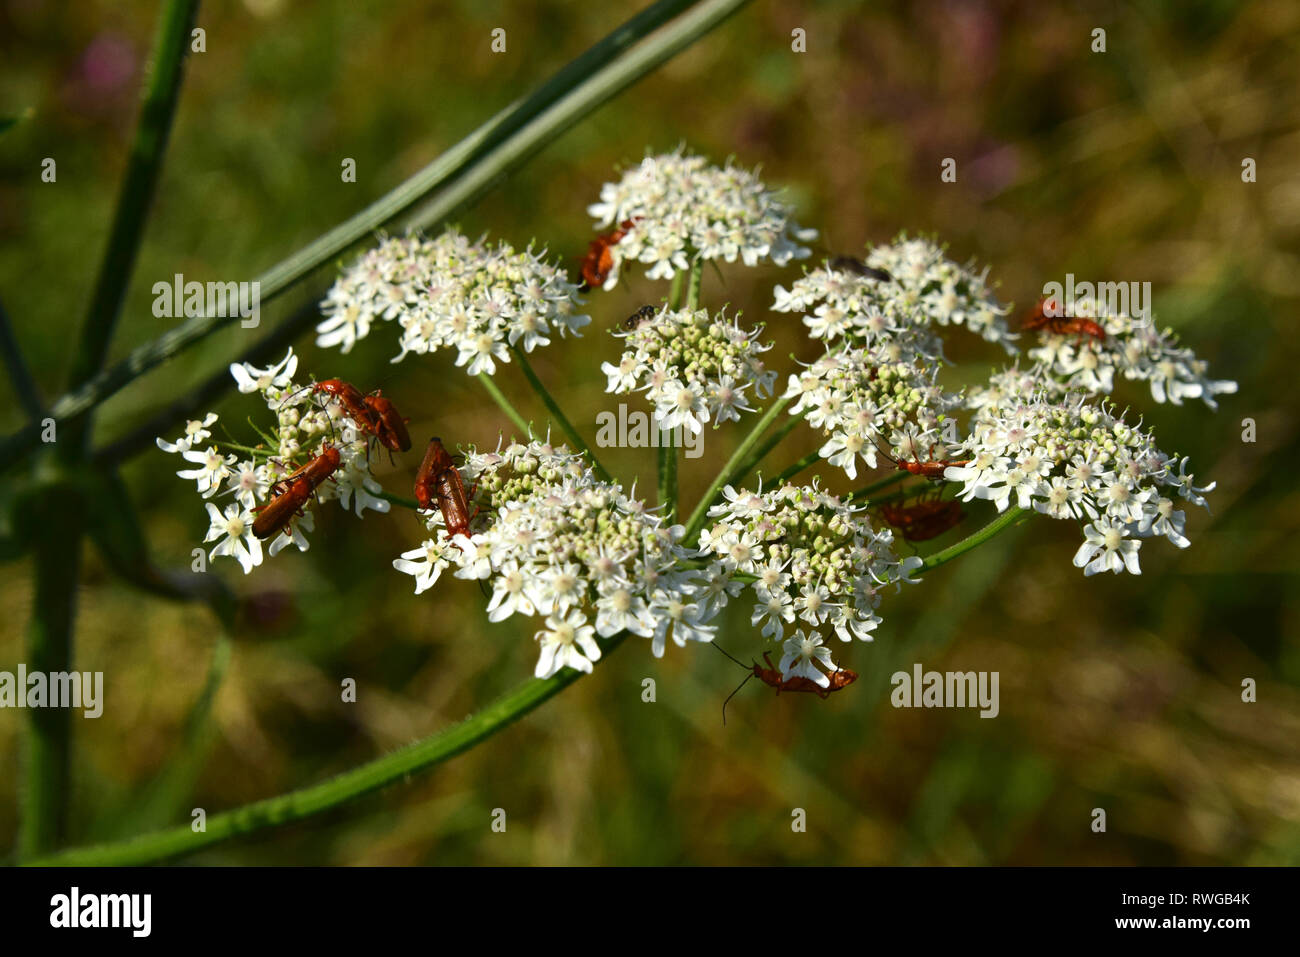 Common Hogweed (Heracleum sphondylium). Umbel with pollinating insects. Germany Stock Photo